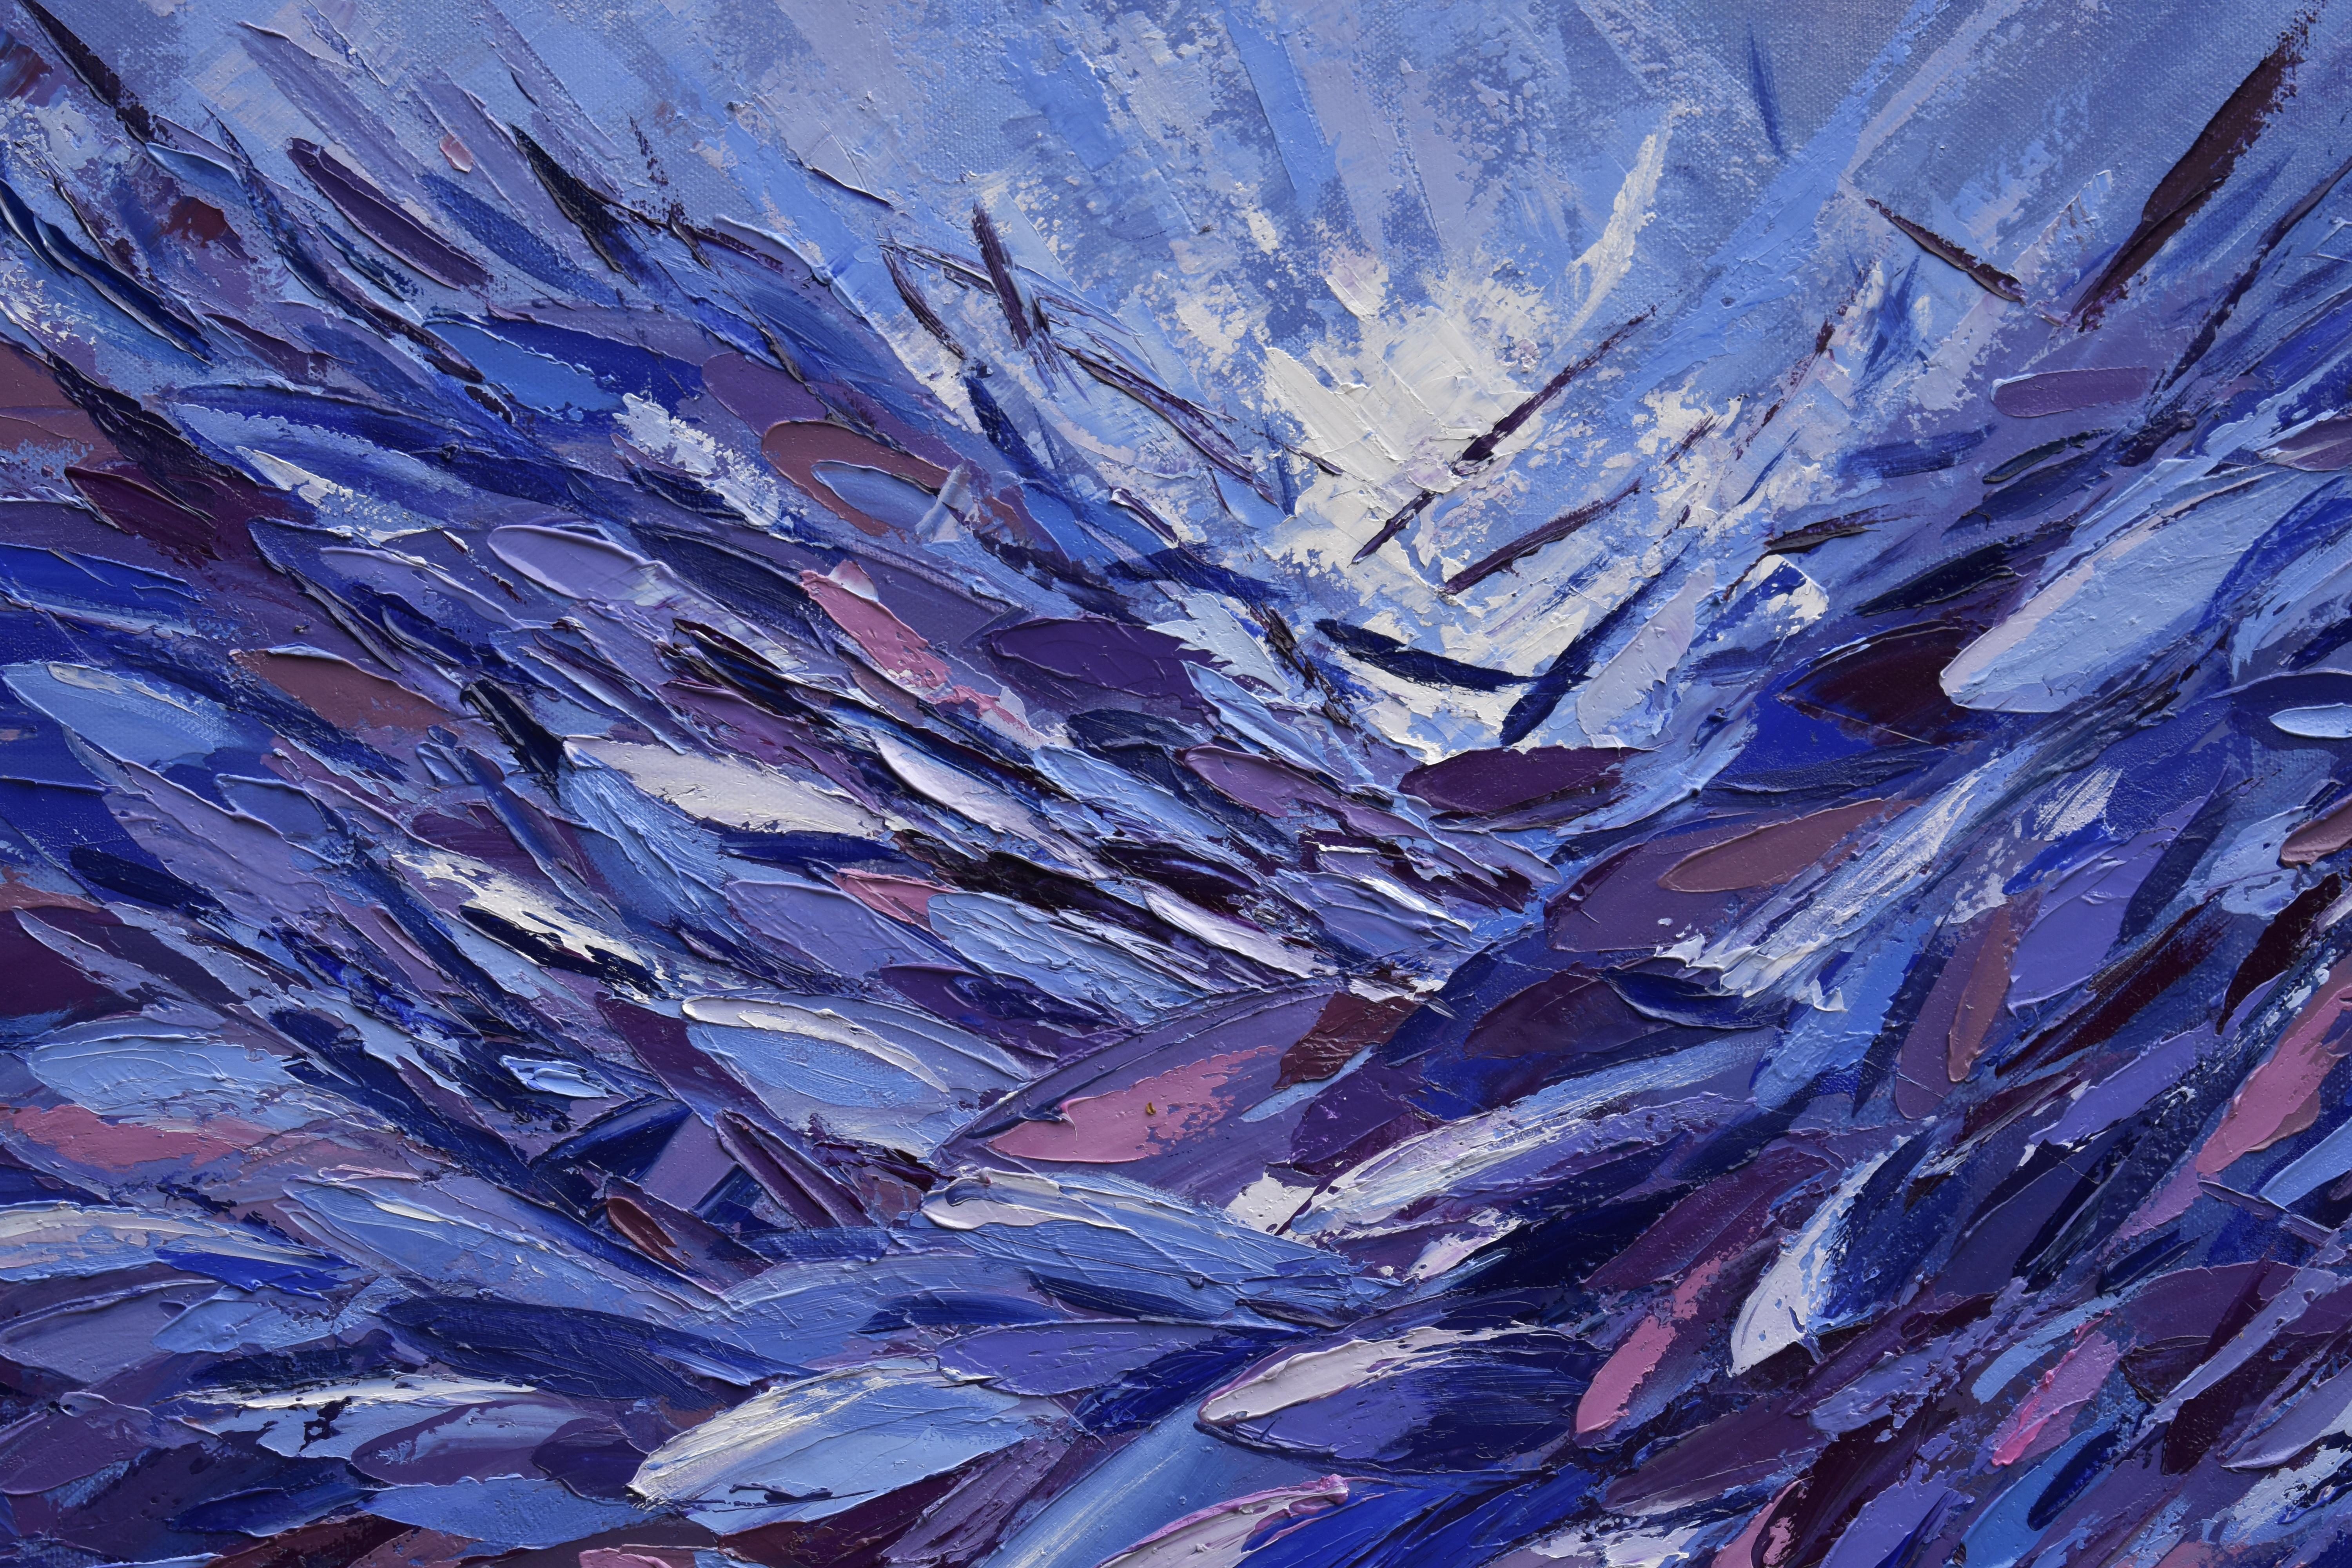 School of Fish Impasto Painting Palette Knife Art

Artist draw her inspiration from interaction with underwater world while scuba diving. 
School of Fish Sardines are invisible in the shadow and deep blue, emerald water just until sunlight switch on